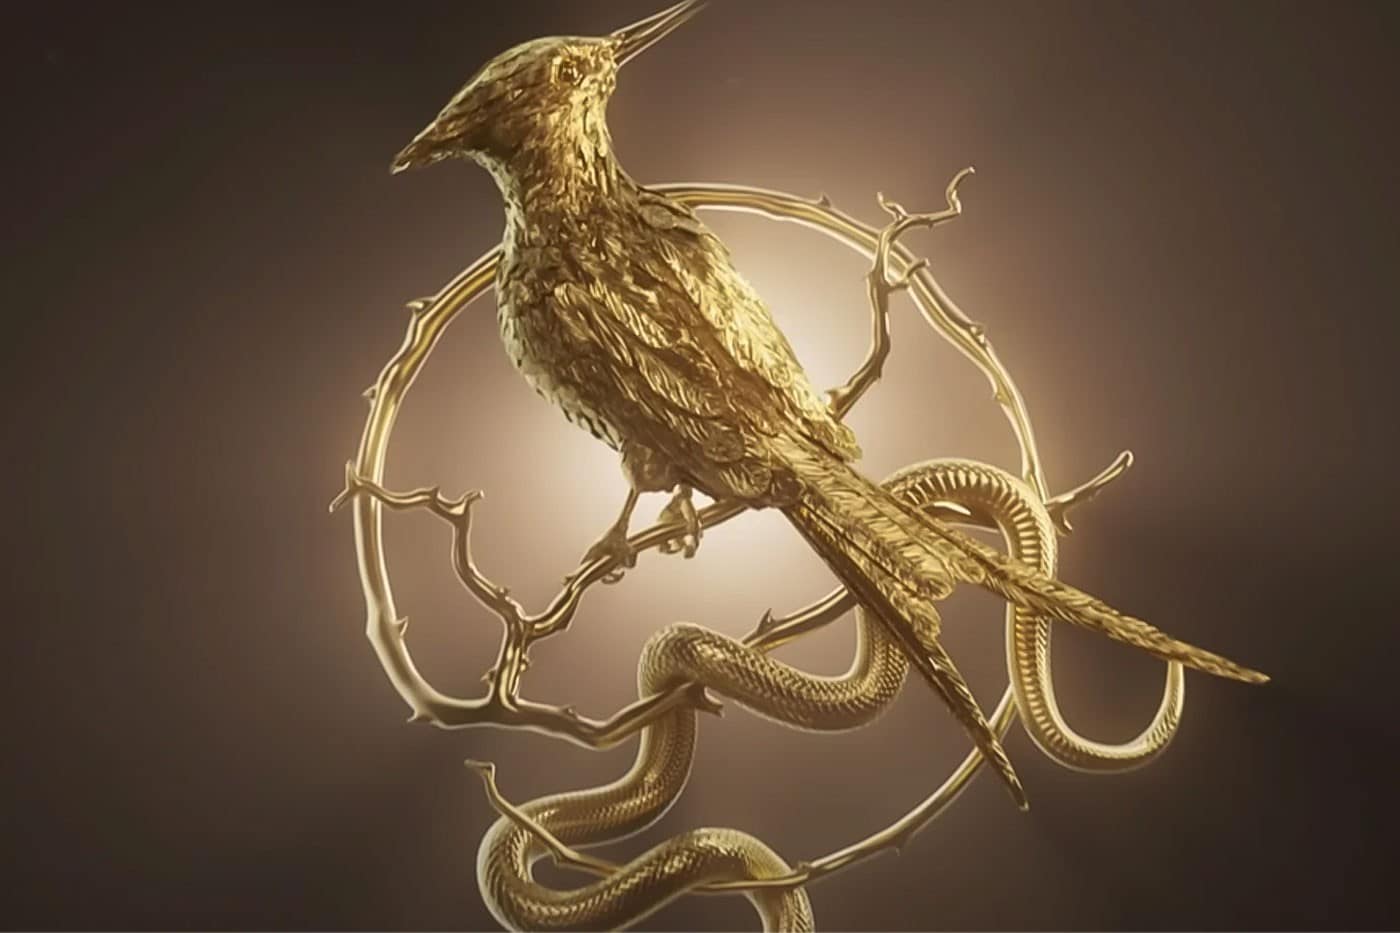 The Hunger Games: The Ballad of Songbirds and Snakes trailer